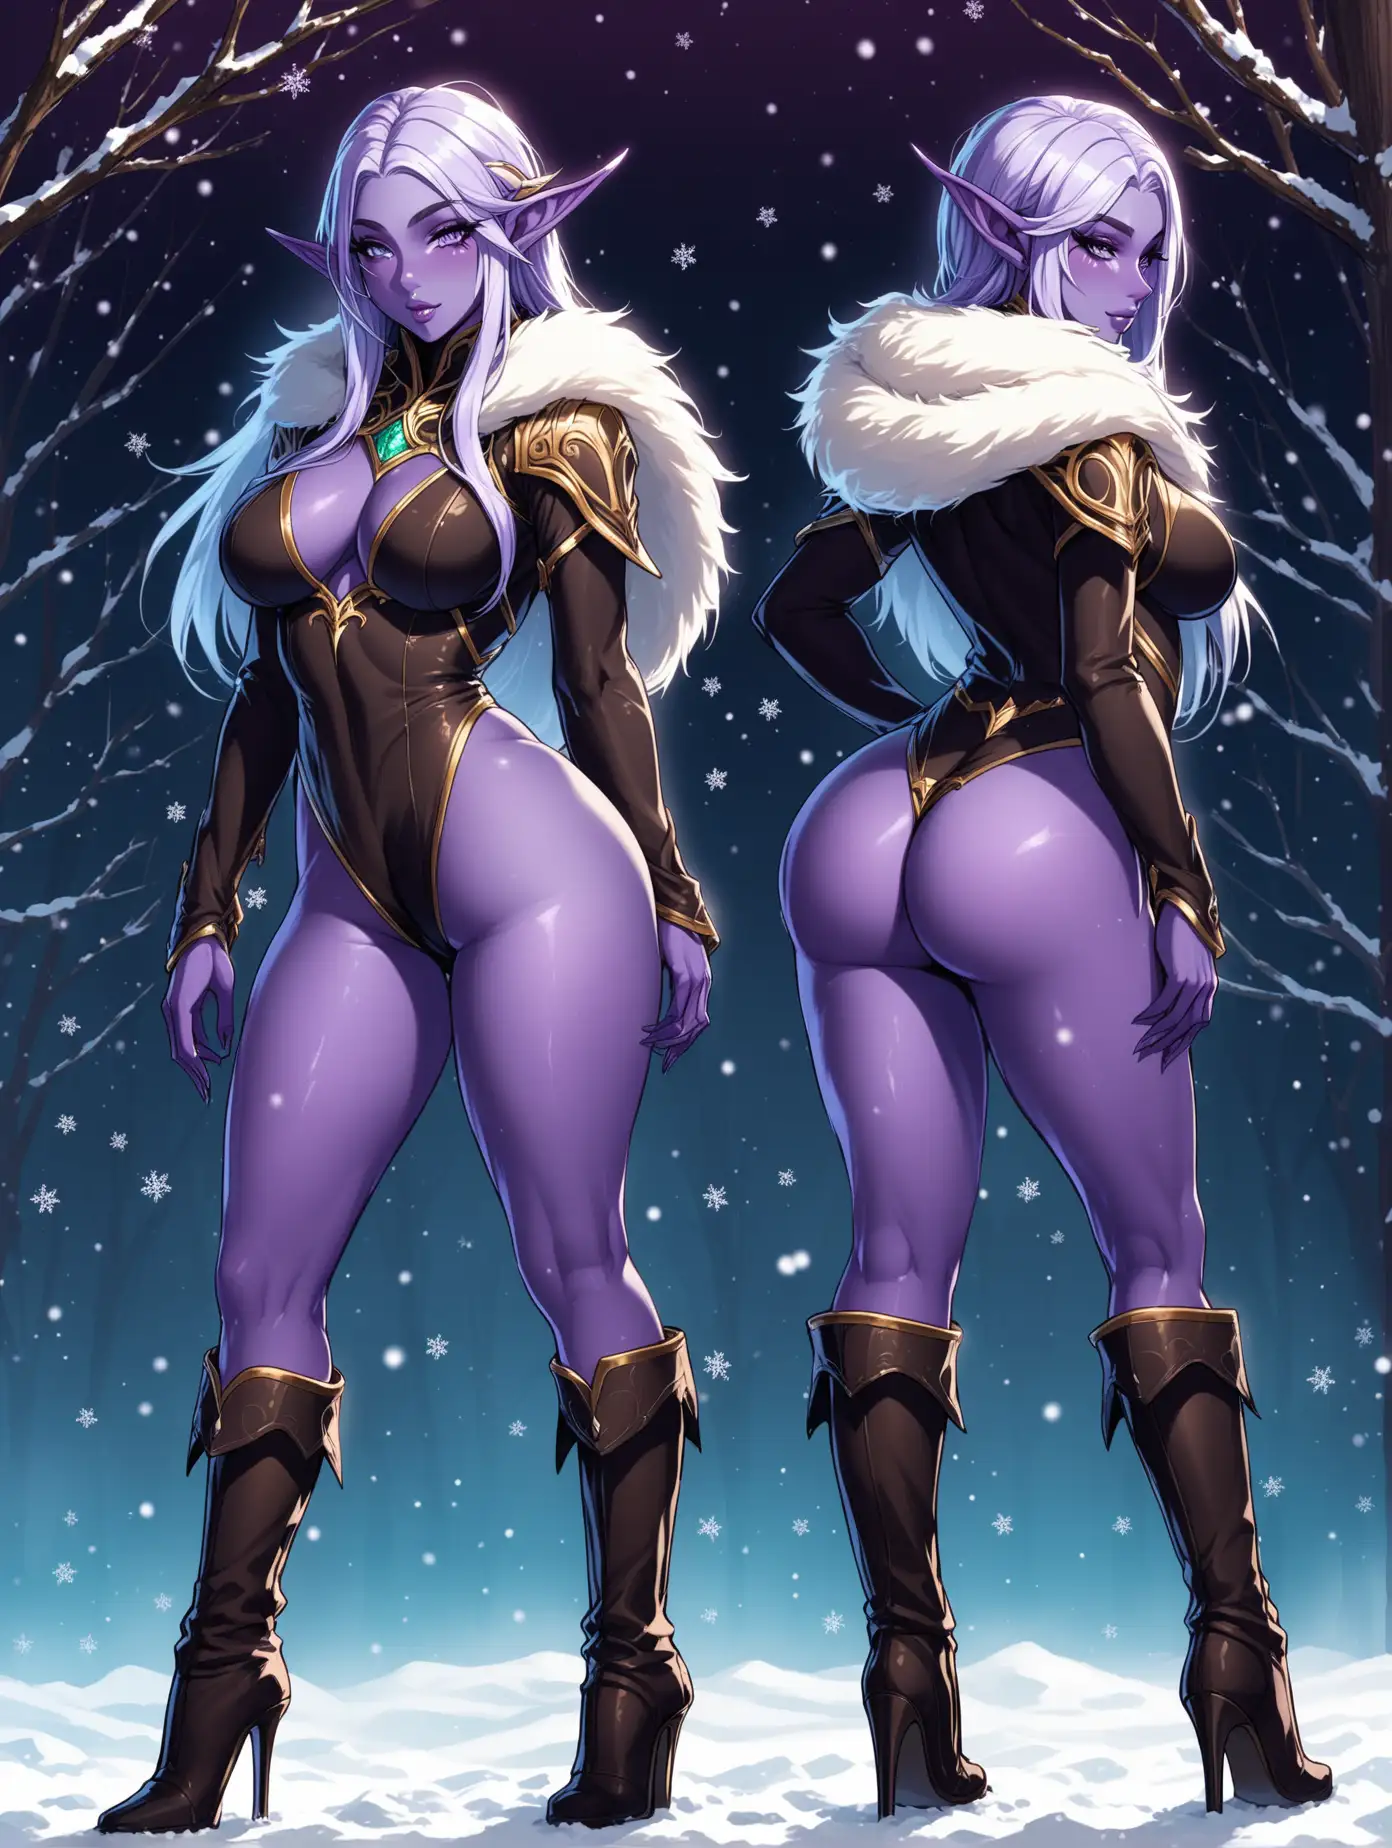 Sensual picture of a hot night elf girl, 2 poses, age 30, purple skin, bit ass epic winter outfit, wearing high heels boots